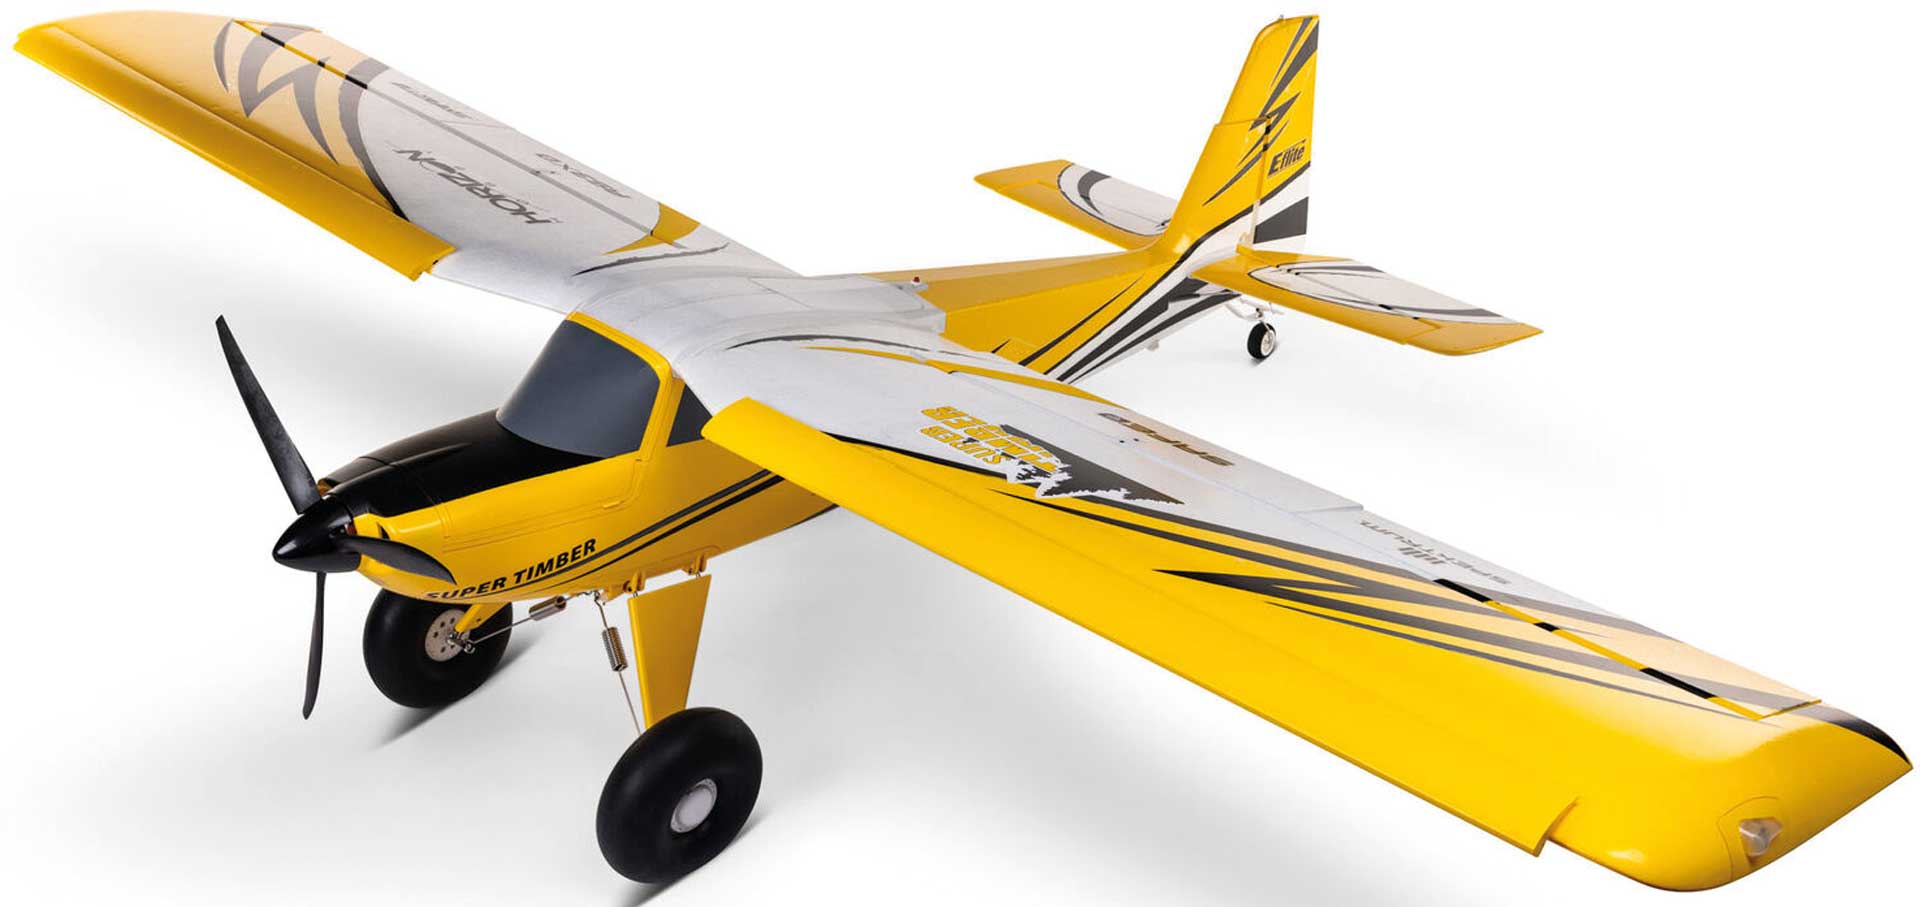 E-FLITE Super Timber 1.7m BNF Basic with AS3X and SAFE Select